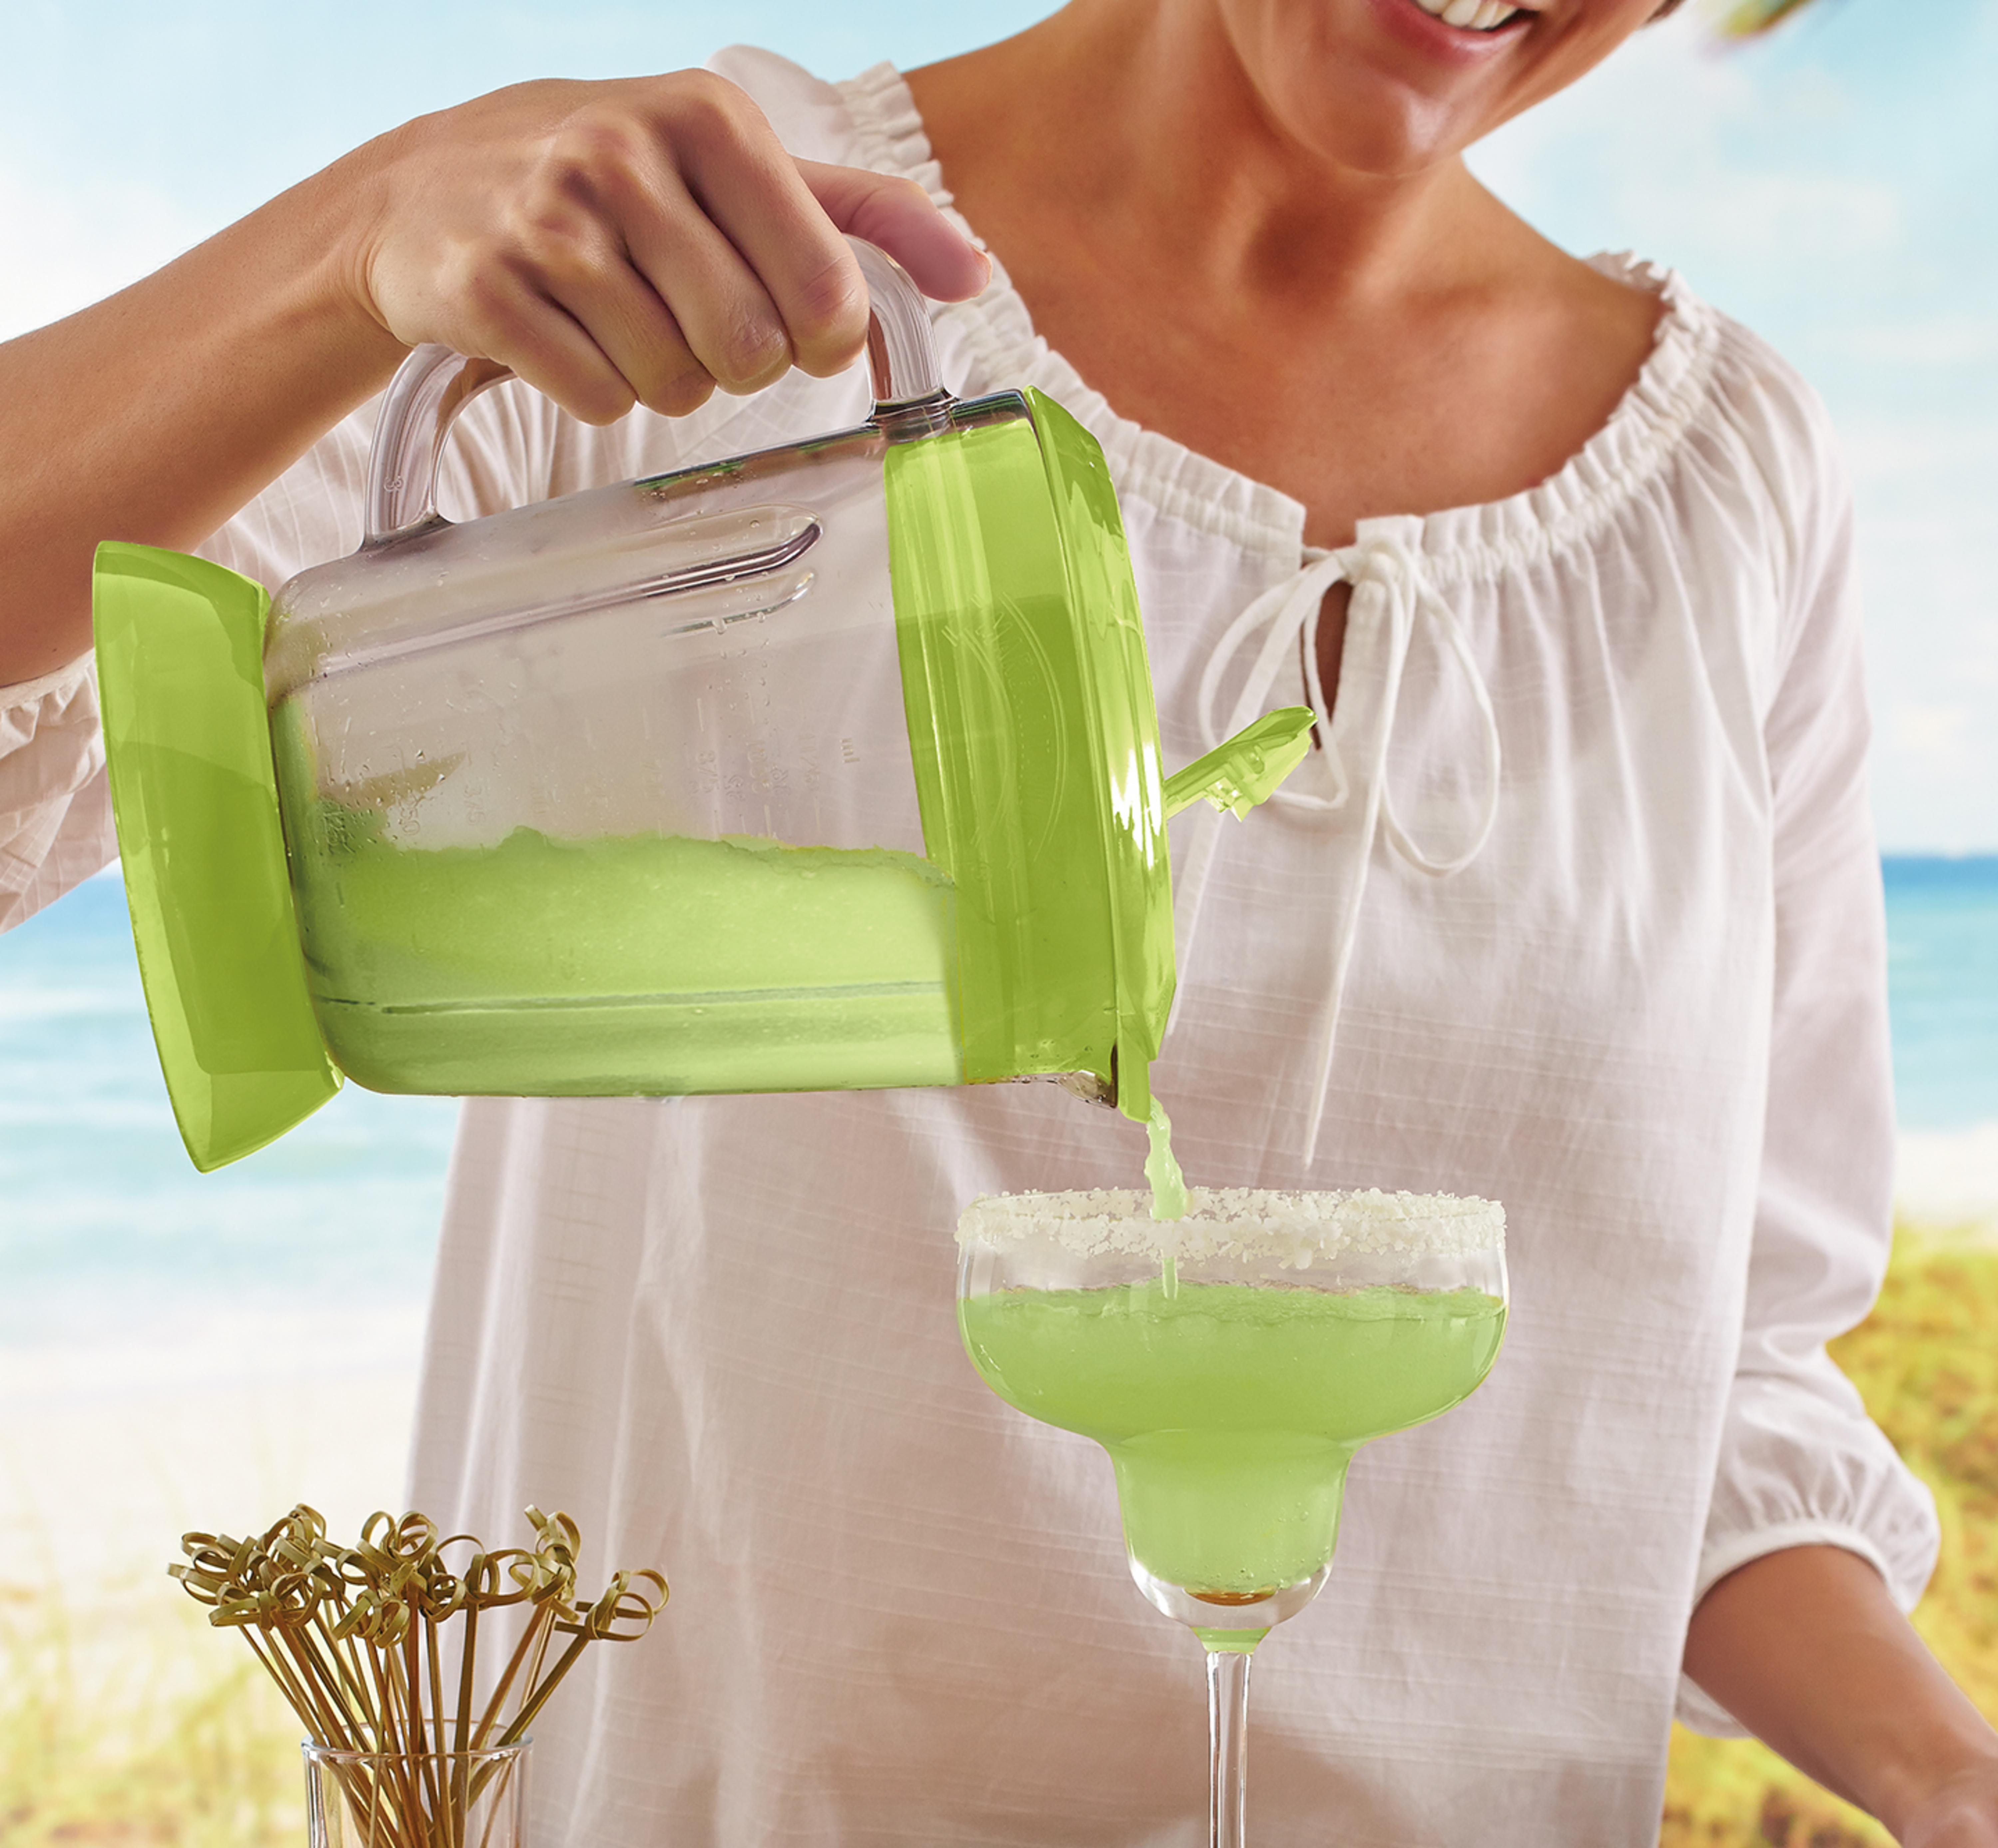 Best Margaritavile Mixed Drink Maker. Automatic Drink Mixer. for sale in  Germantown, Tennessee for 2023